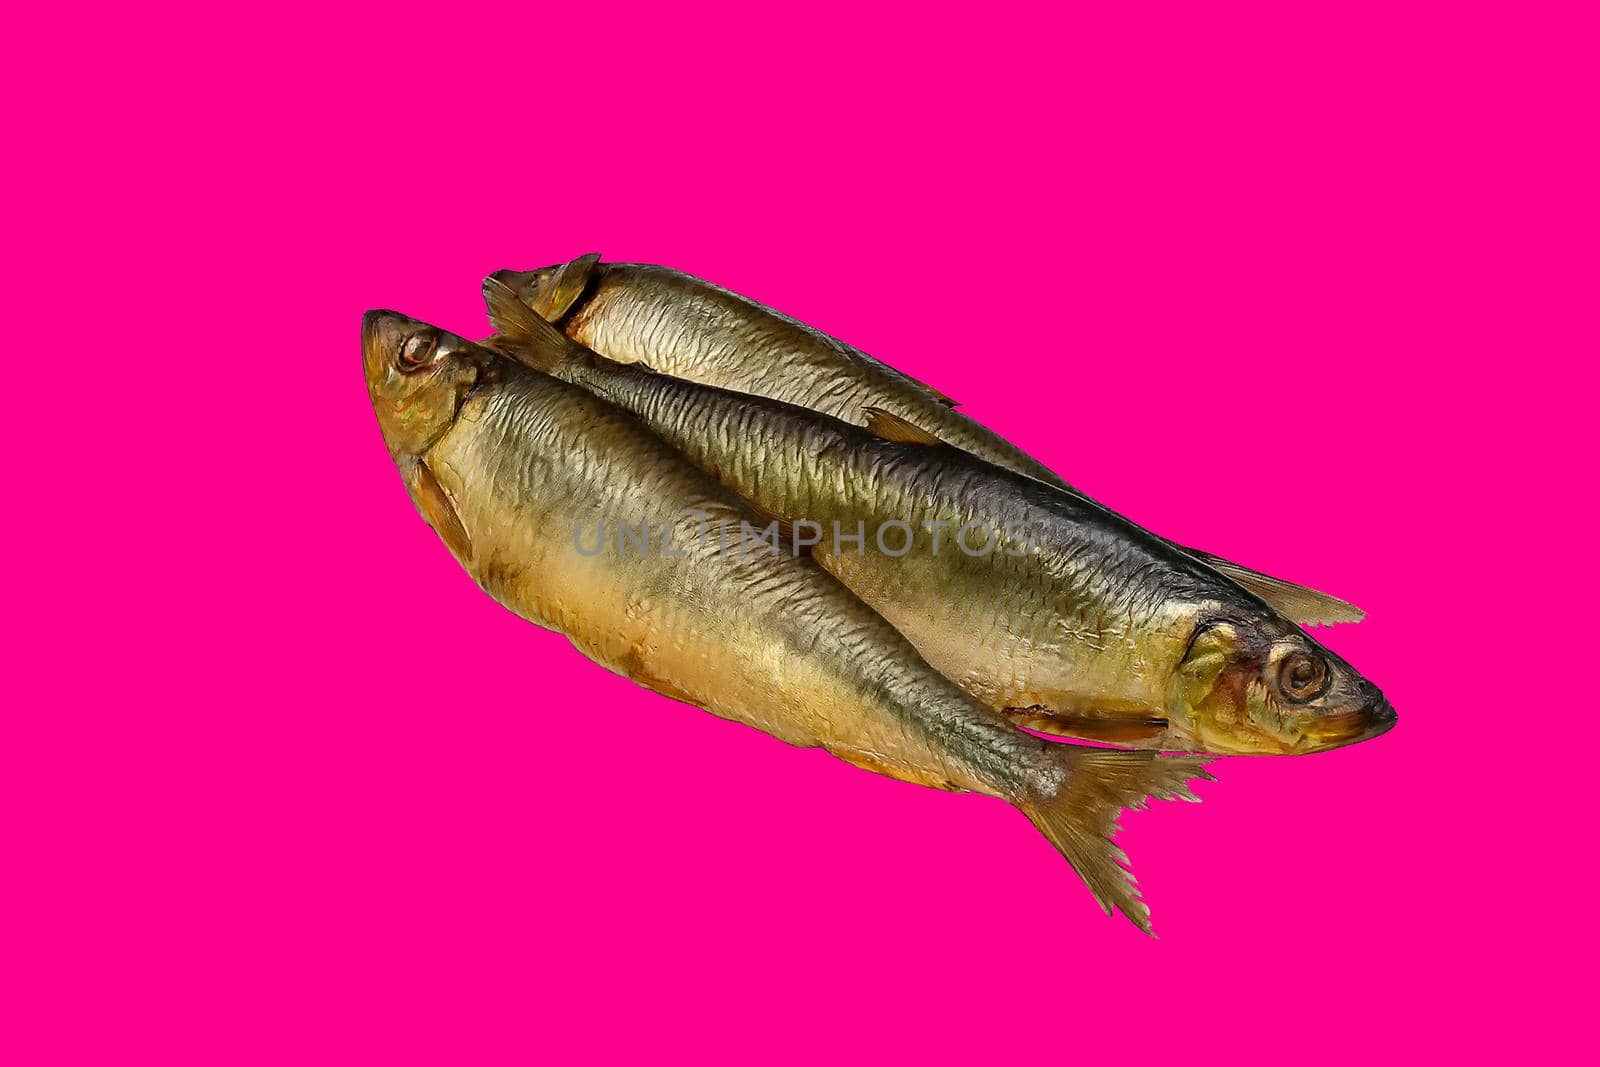 Fish herring iwasi smoked against pink background. Front view, indoors horizontal shot. by Essffes